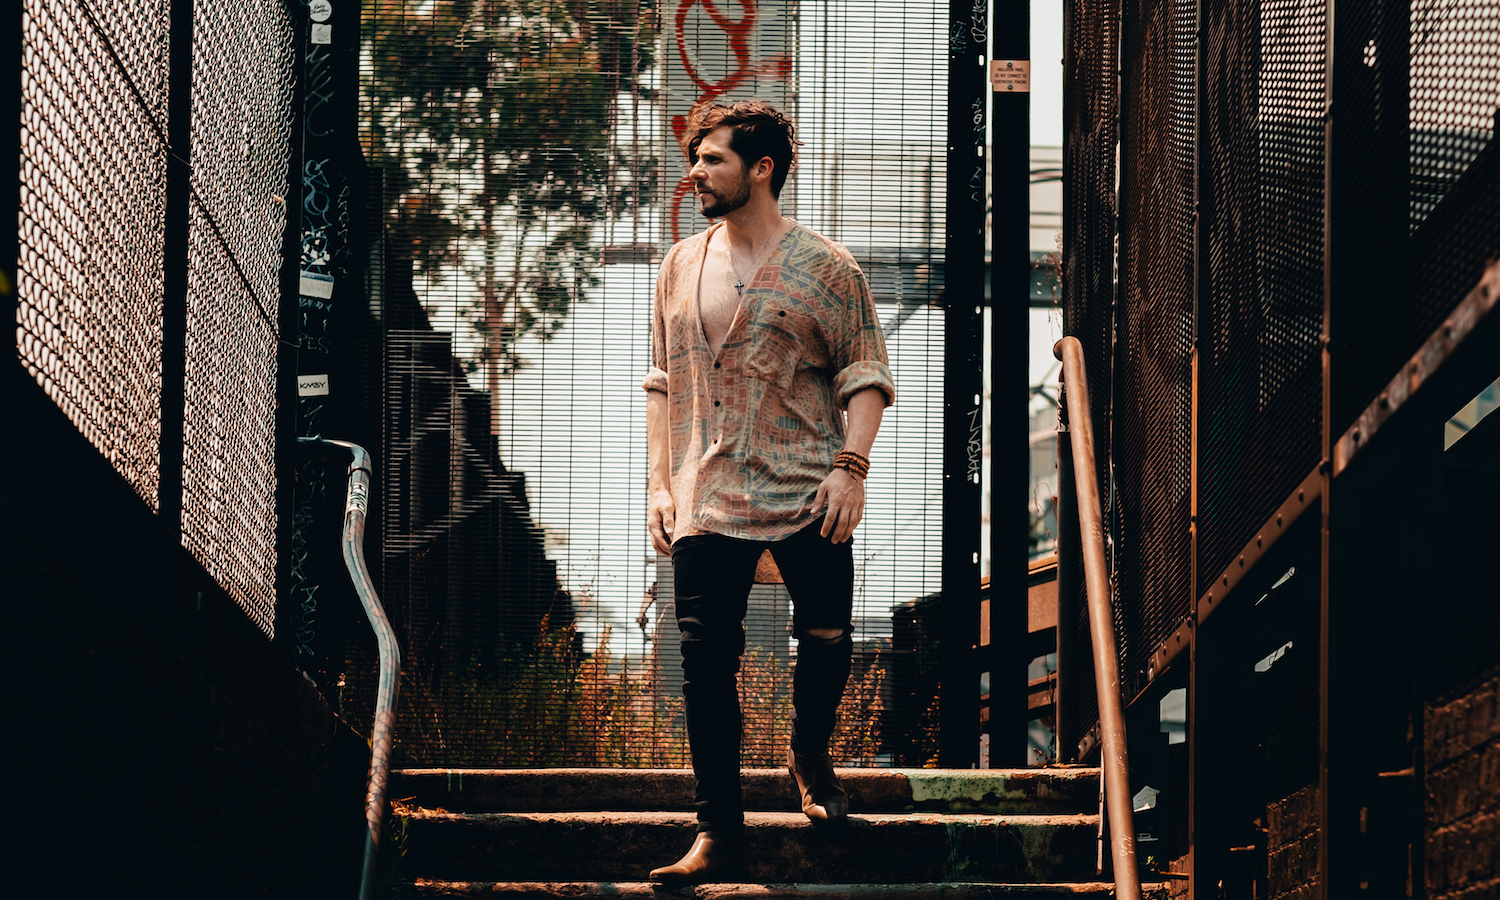 Andy Penkow unveils new single ‘The Biggest Hearts Can Break’